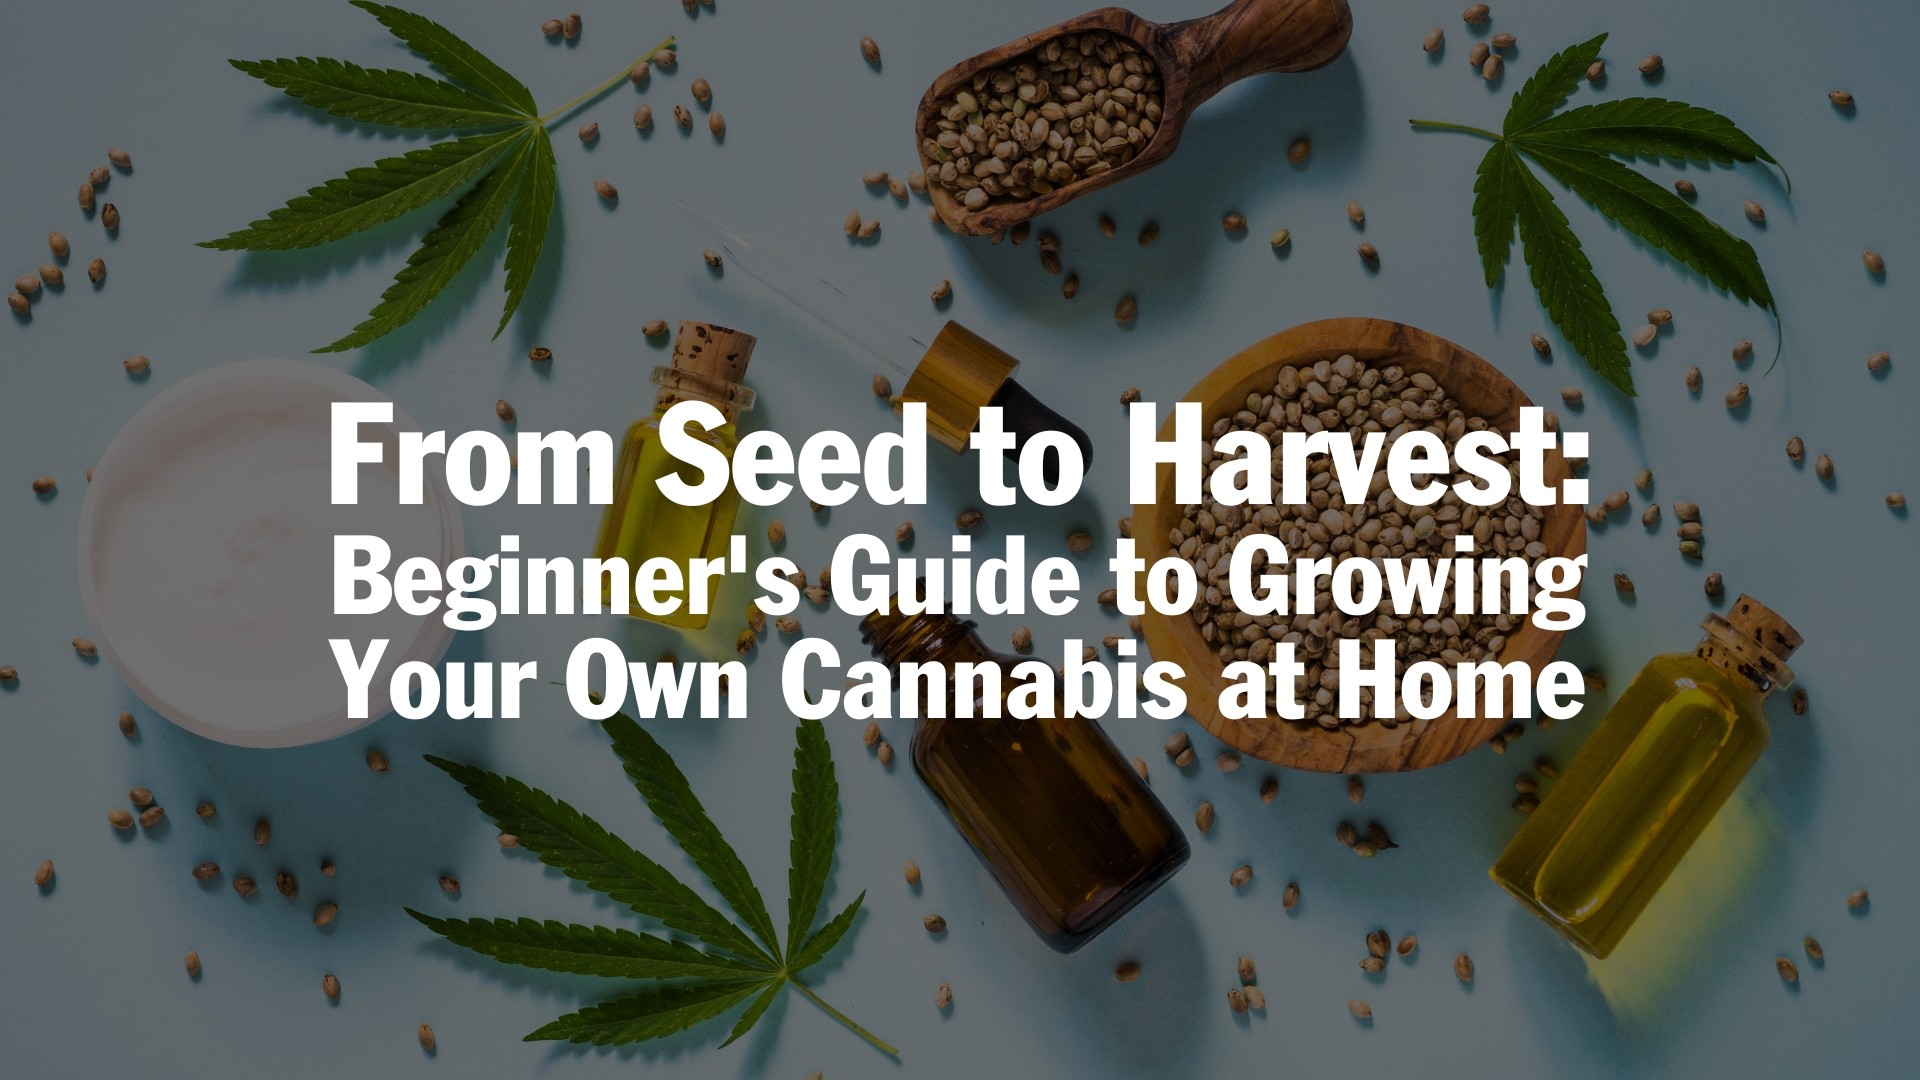 From Seed to Harvest: A Beginner's Guide to Growing Your Own Cannabis at Home